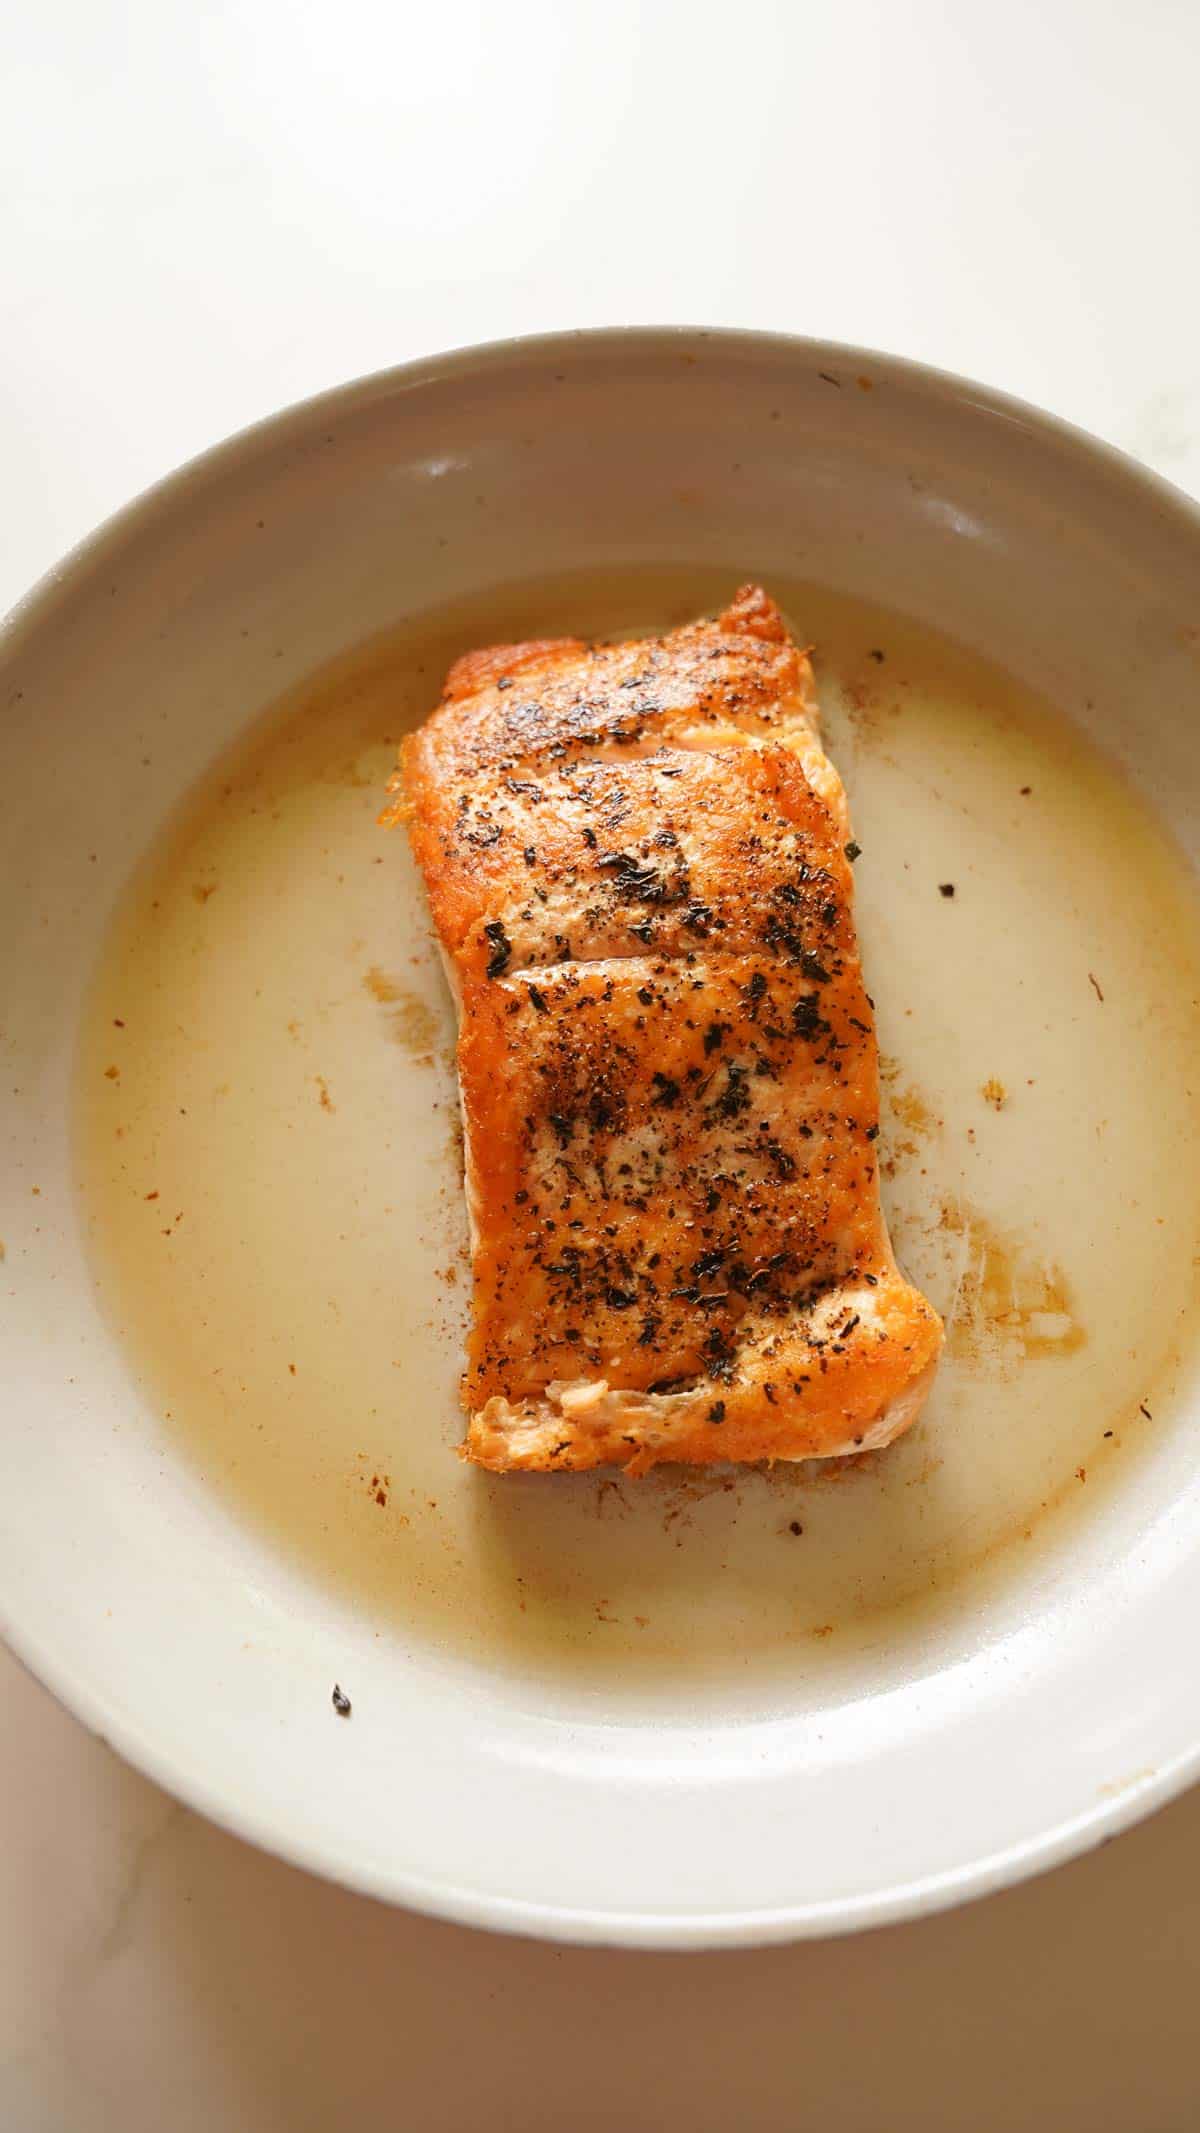 filet of salmon seared in a pan with seasoning on top